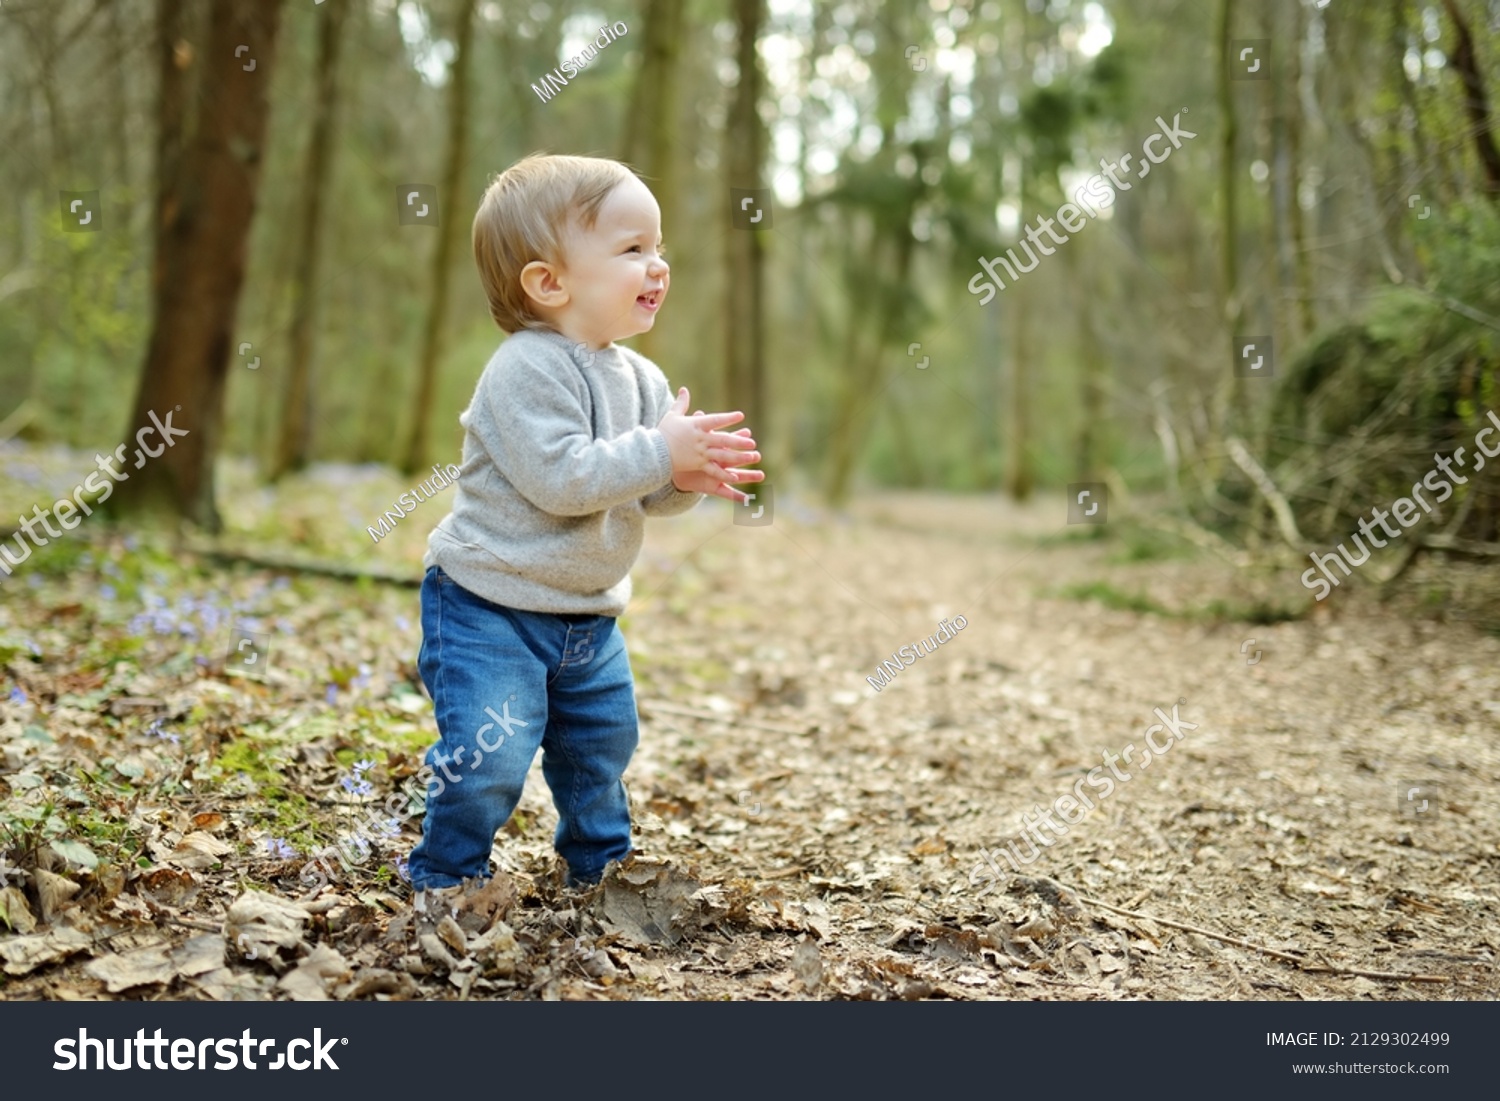 Adorable toddler boy having fun during a hike in the woods on beautiful sunny spring day. Active family leisure with kids. Child exploring nature. #2129302499